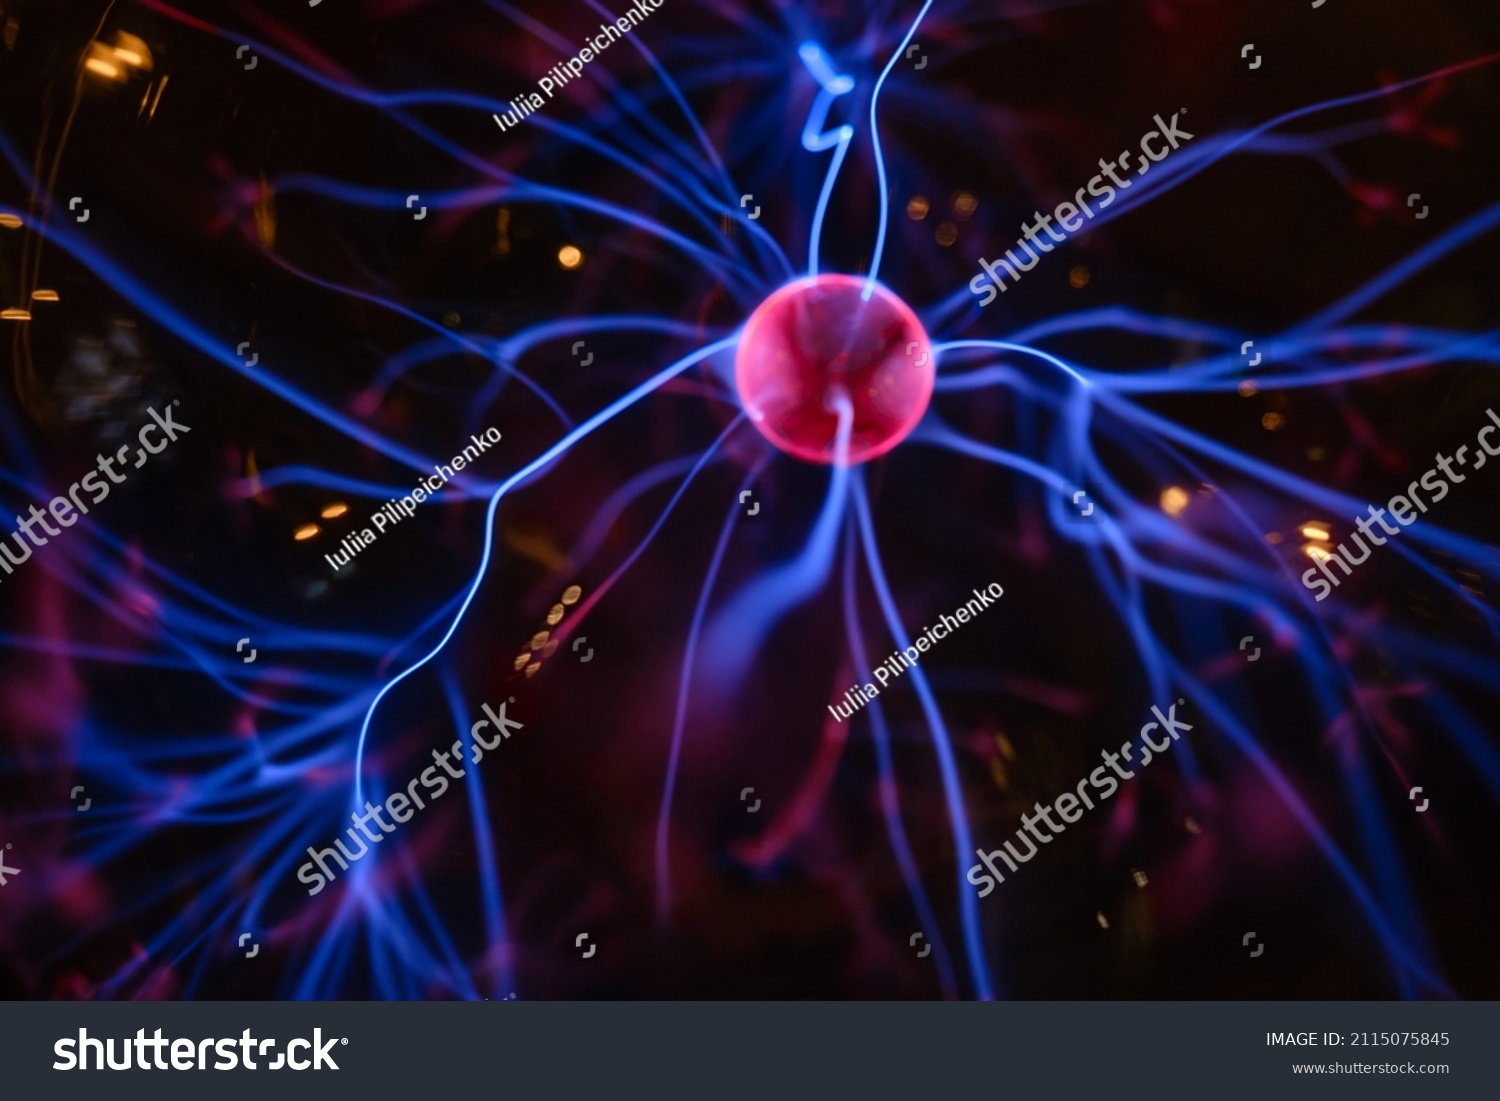 Abstract neuron background. Flashes of purple pink light on a dark background #2115075845